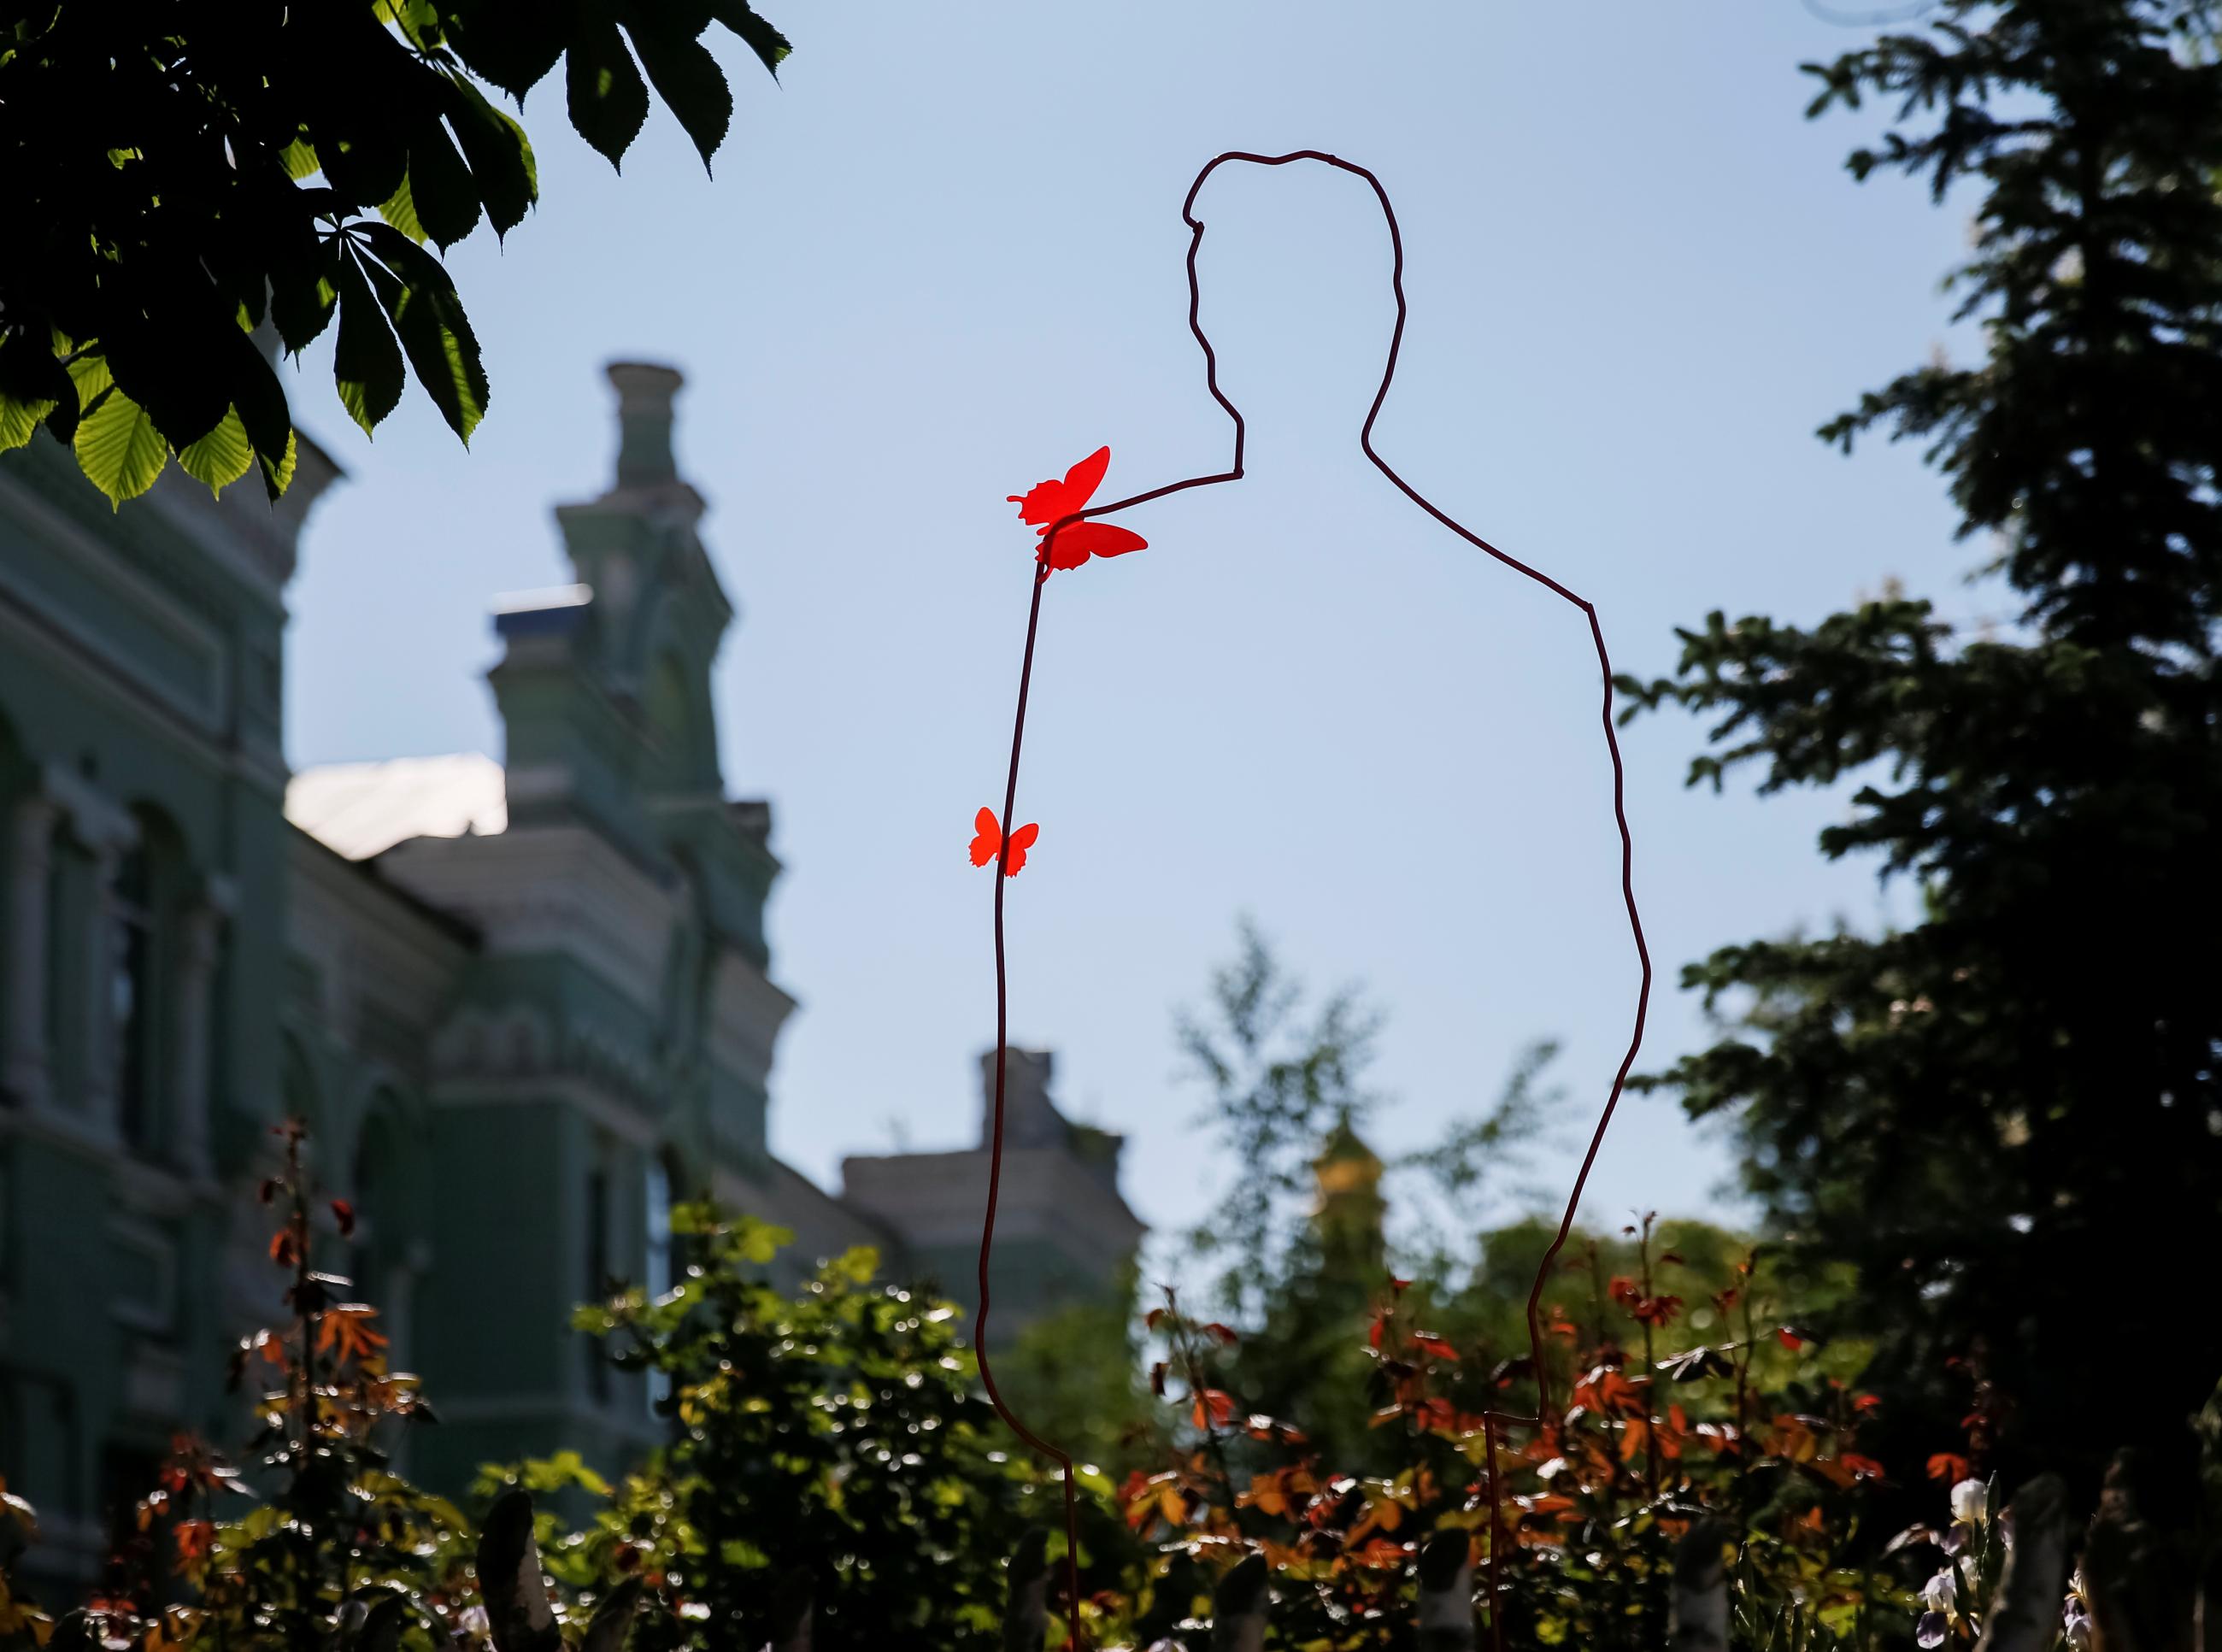 A metal silhouette symbolizing a victim of AIDS is seen during a ceremony near a monument in memory of AIDS victims as part of the commemoration of International AIDS Memorial Day in Kyiv, Ukraine, on May 19, 2017. 